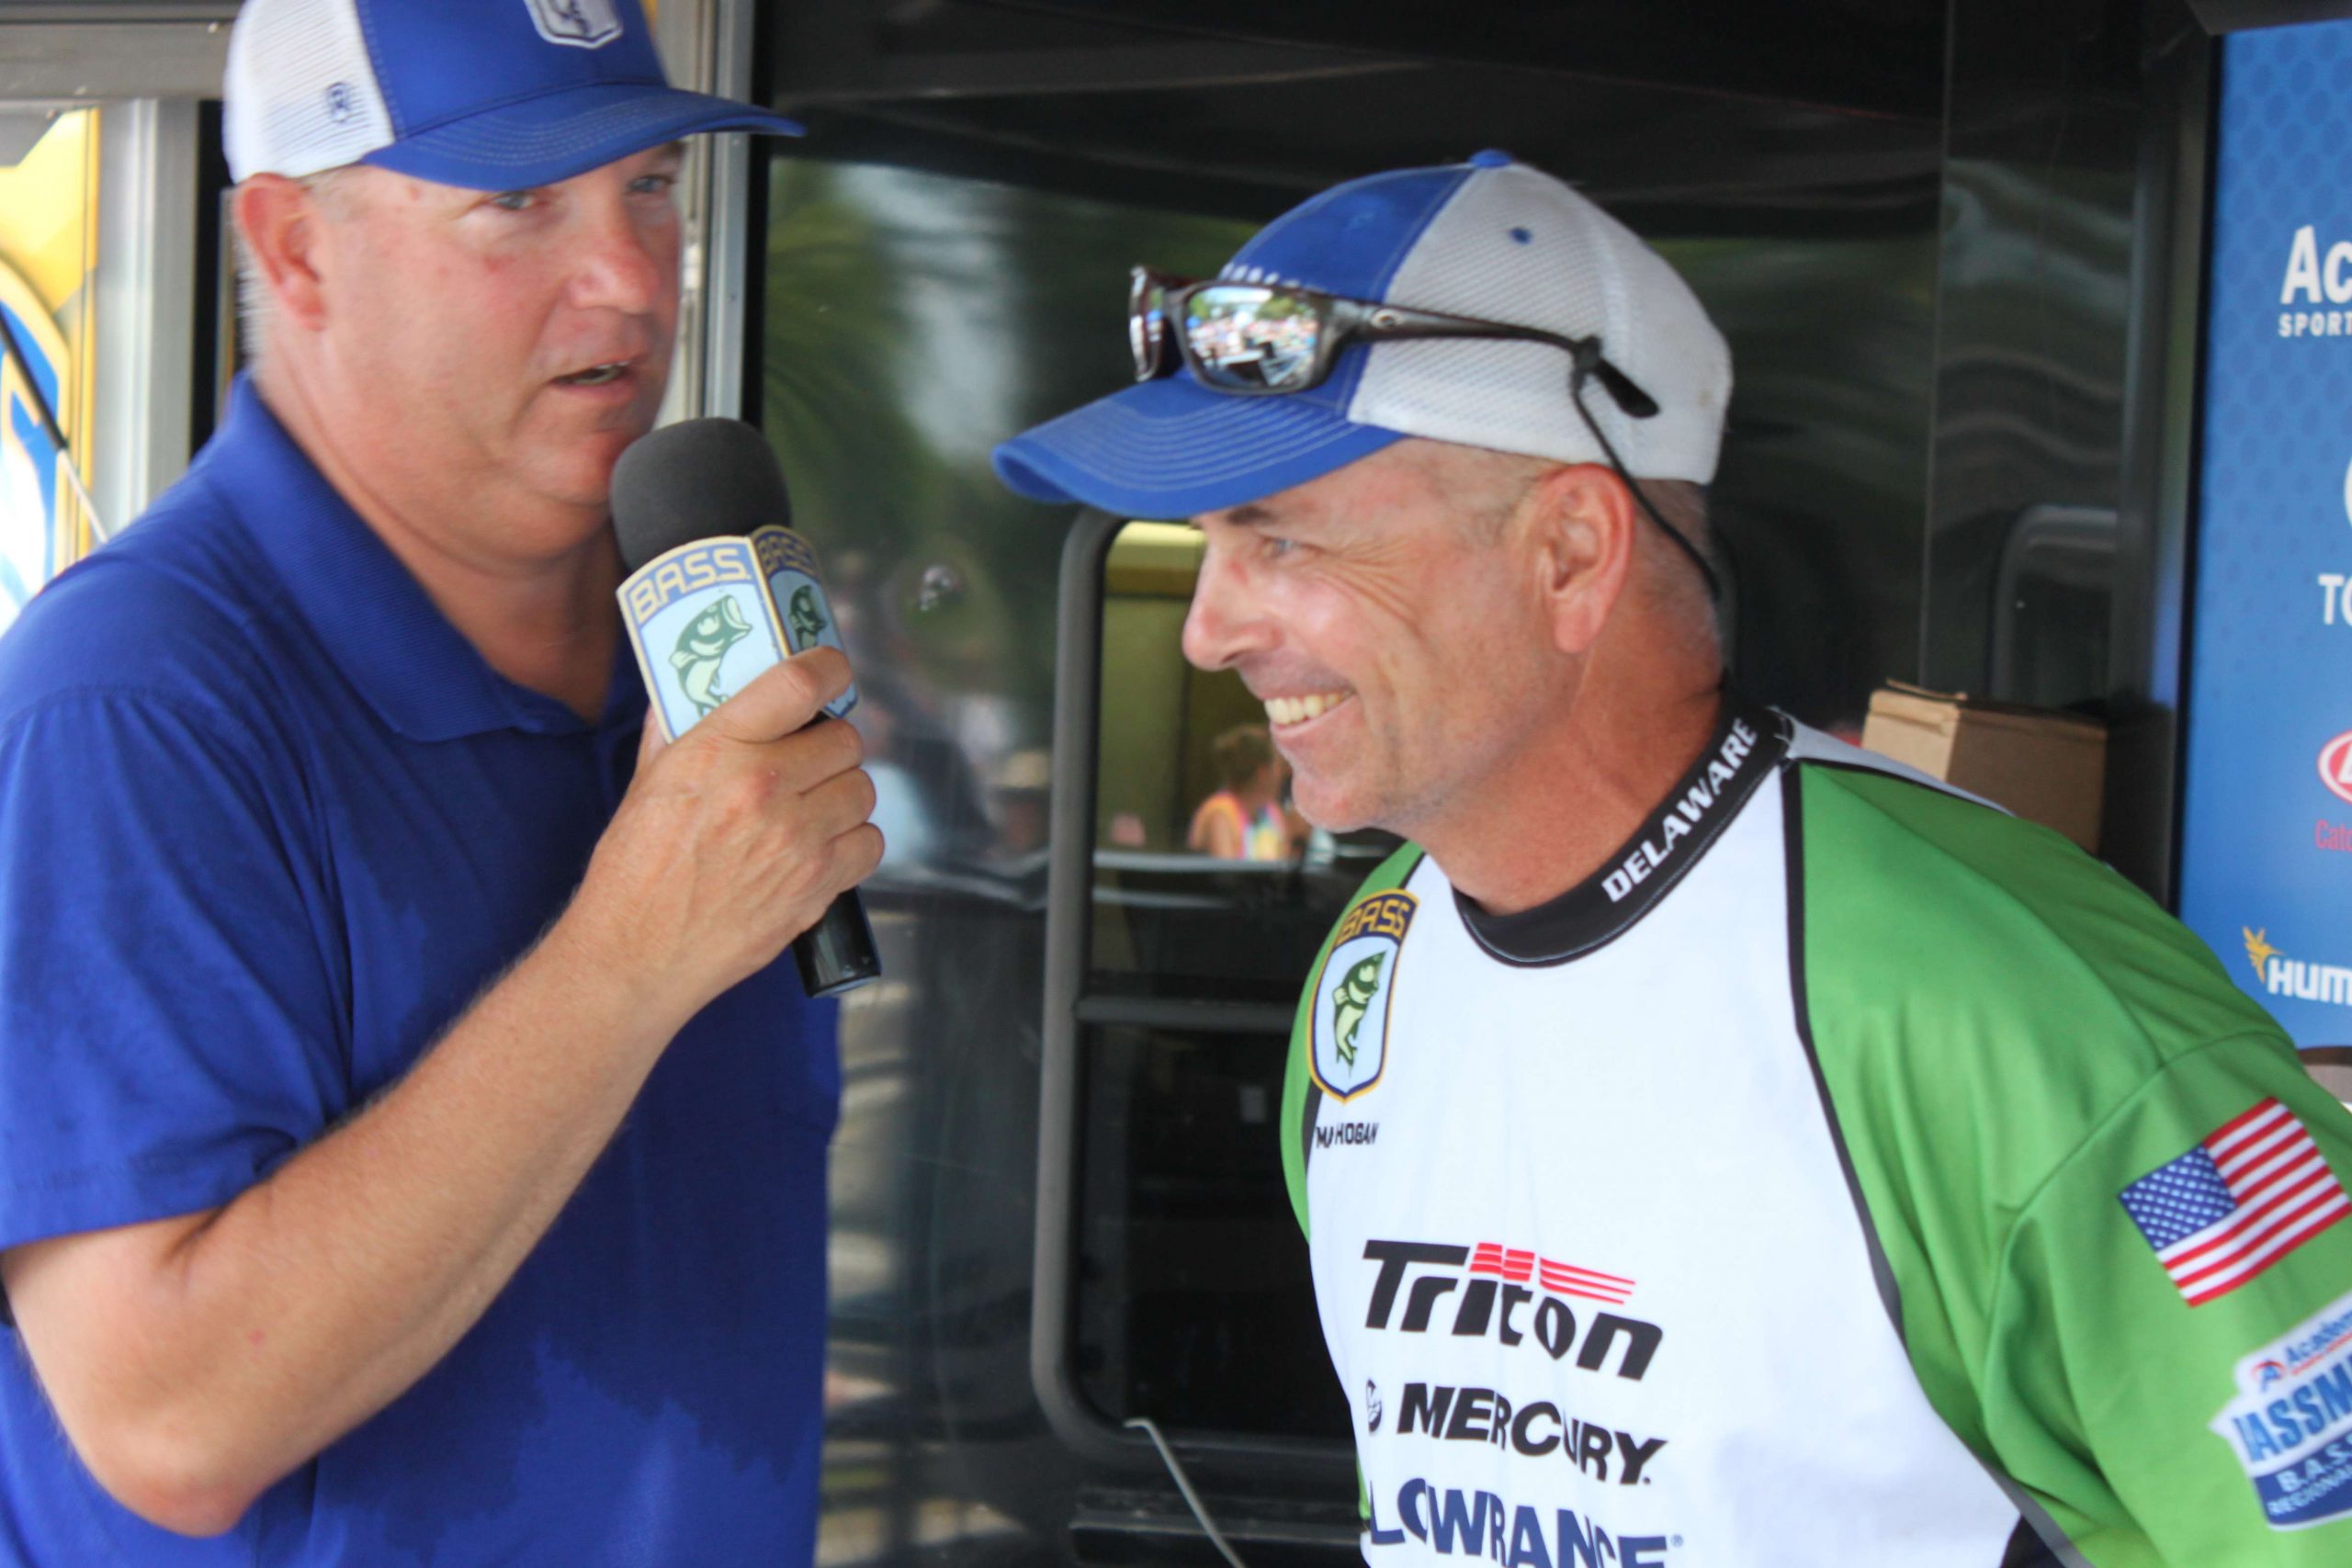 After weighing the bass for Big Bass honors, Hogan reacts when his catch is one ounce shy of the 5-5 bass caught a day earlier by Pennsylvaniaâs Brad Bressler.